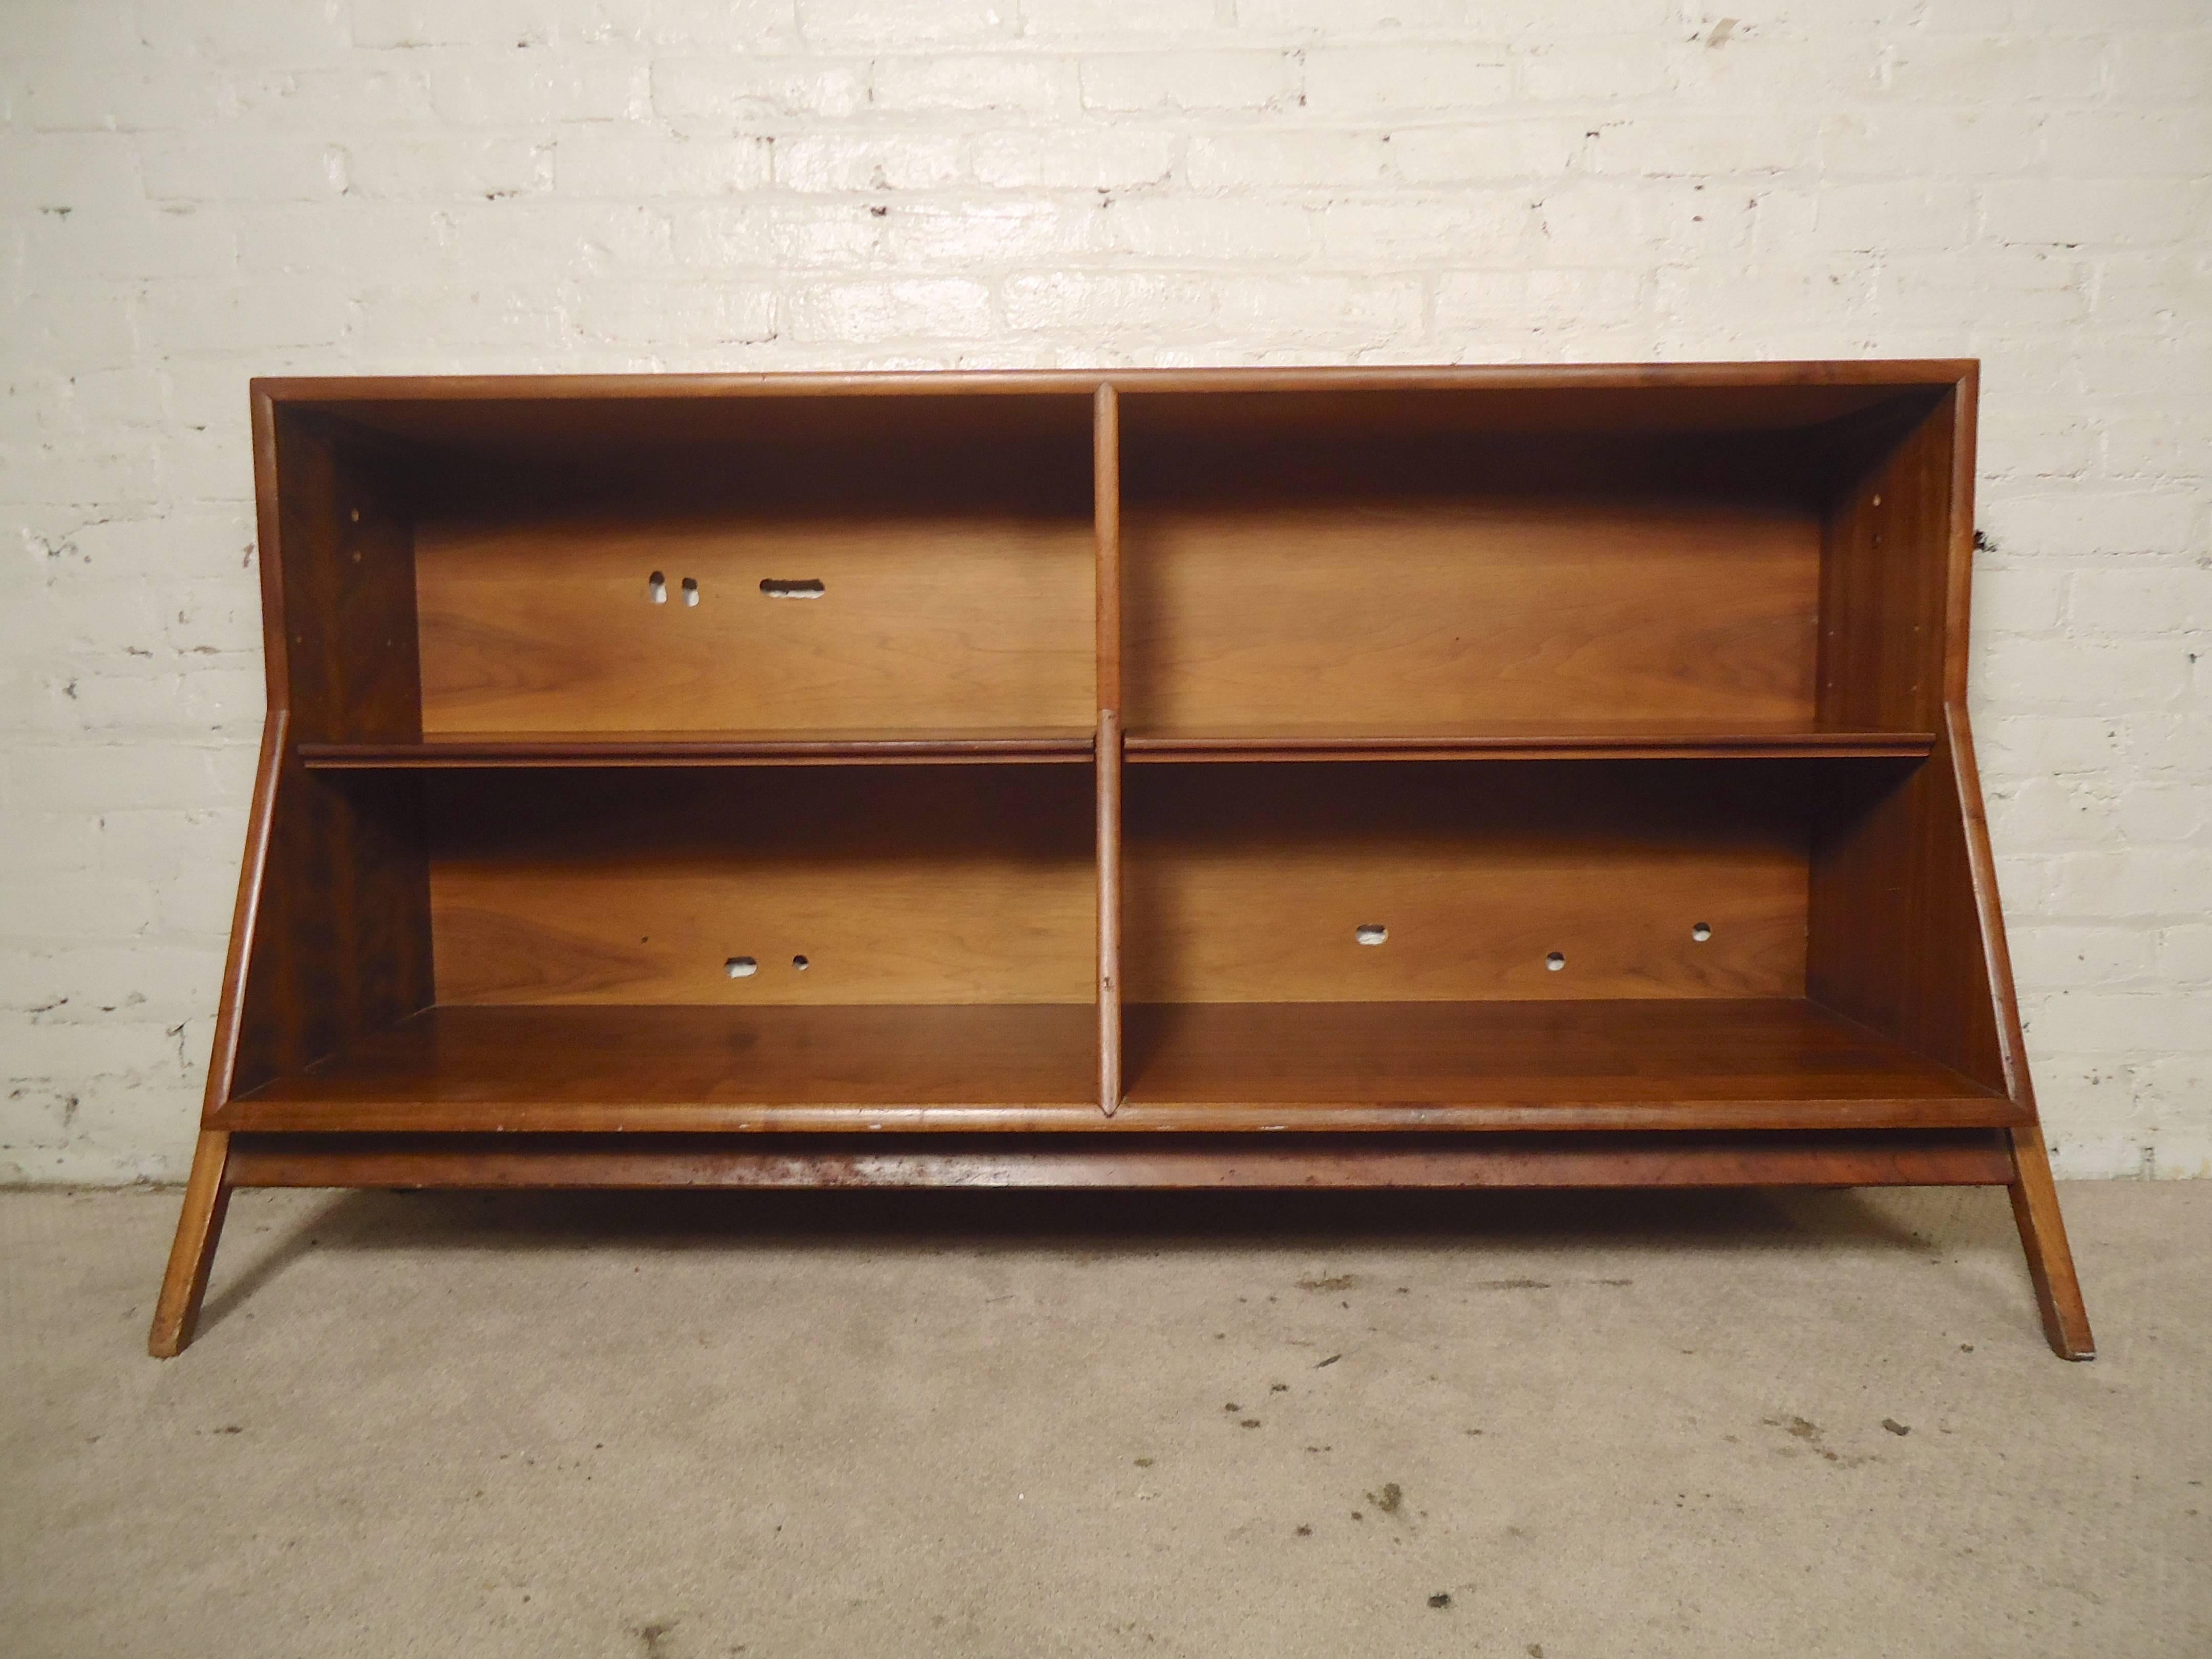 Beautiful Mid-Century open shelving unit with warm walnut grain throughout. Sculpted legs in the style of Vladimir Kagan, adjustable shelves, angled bottom cabinet.

(Please confirm item location - NY or NJ - with dealer).